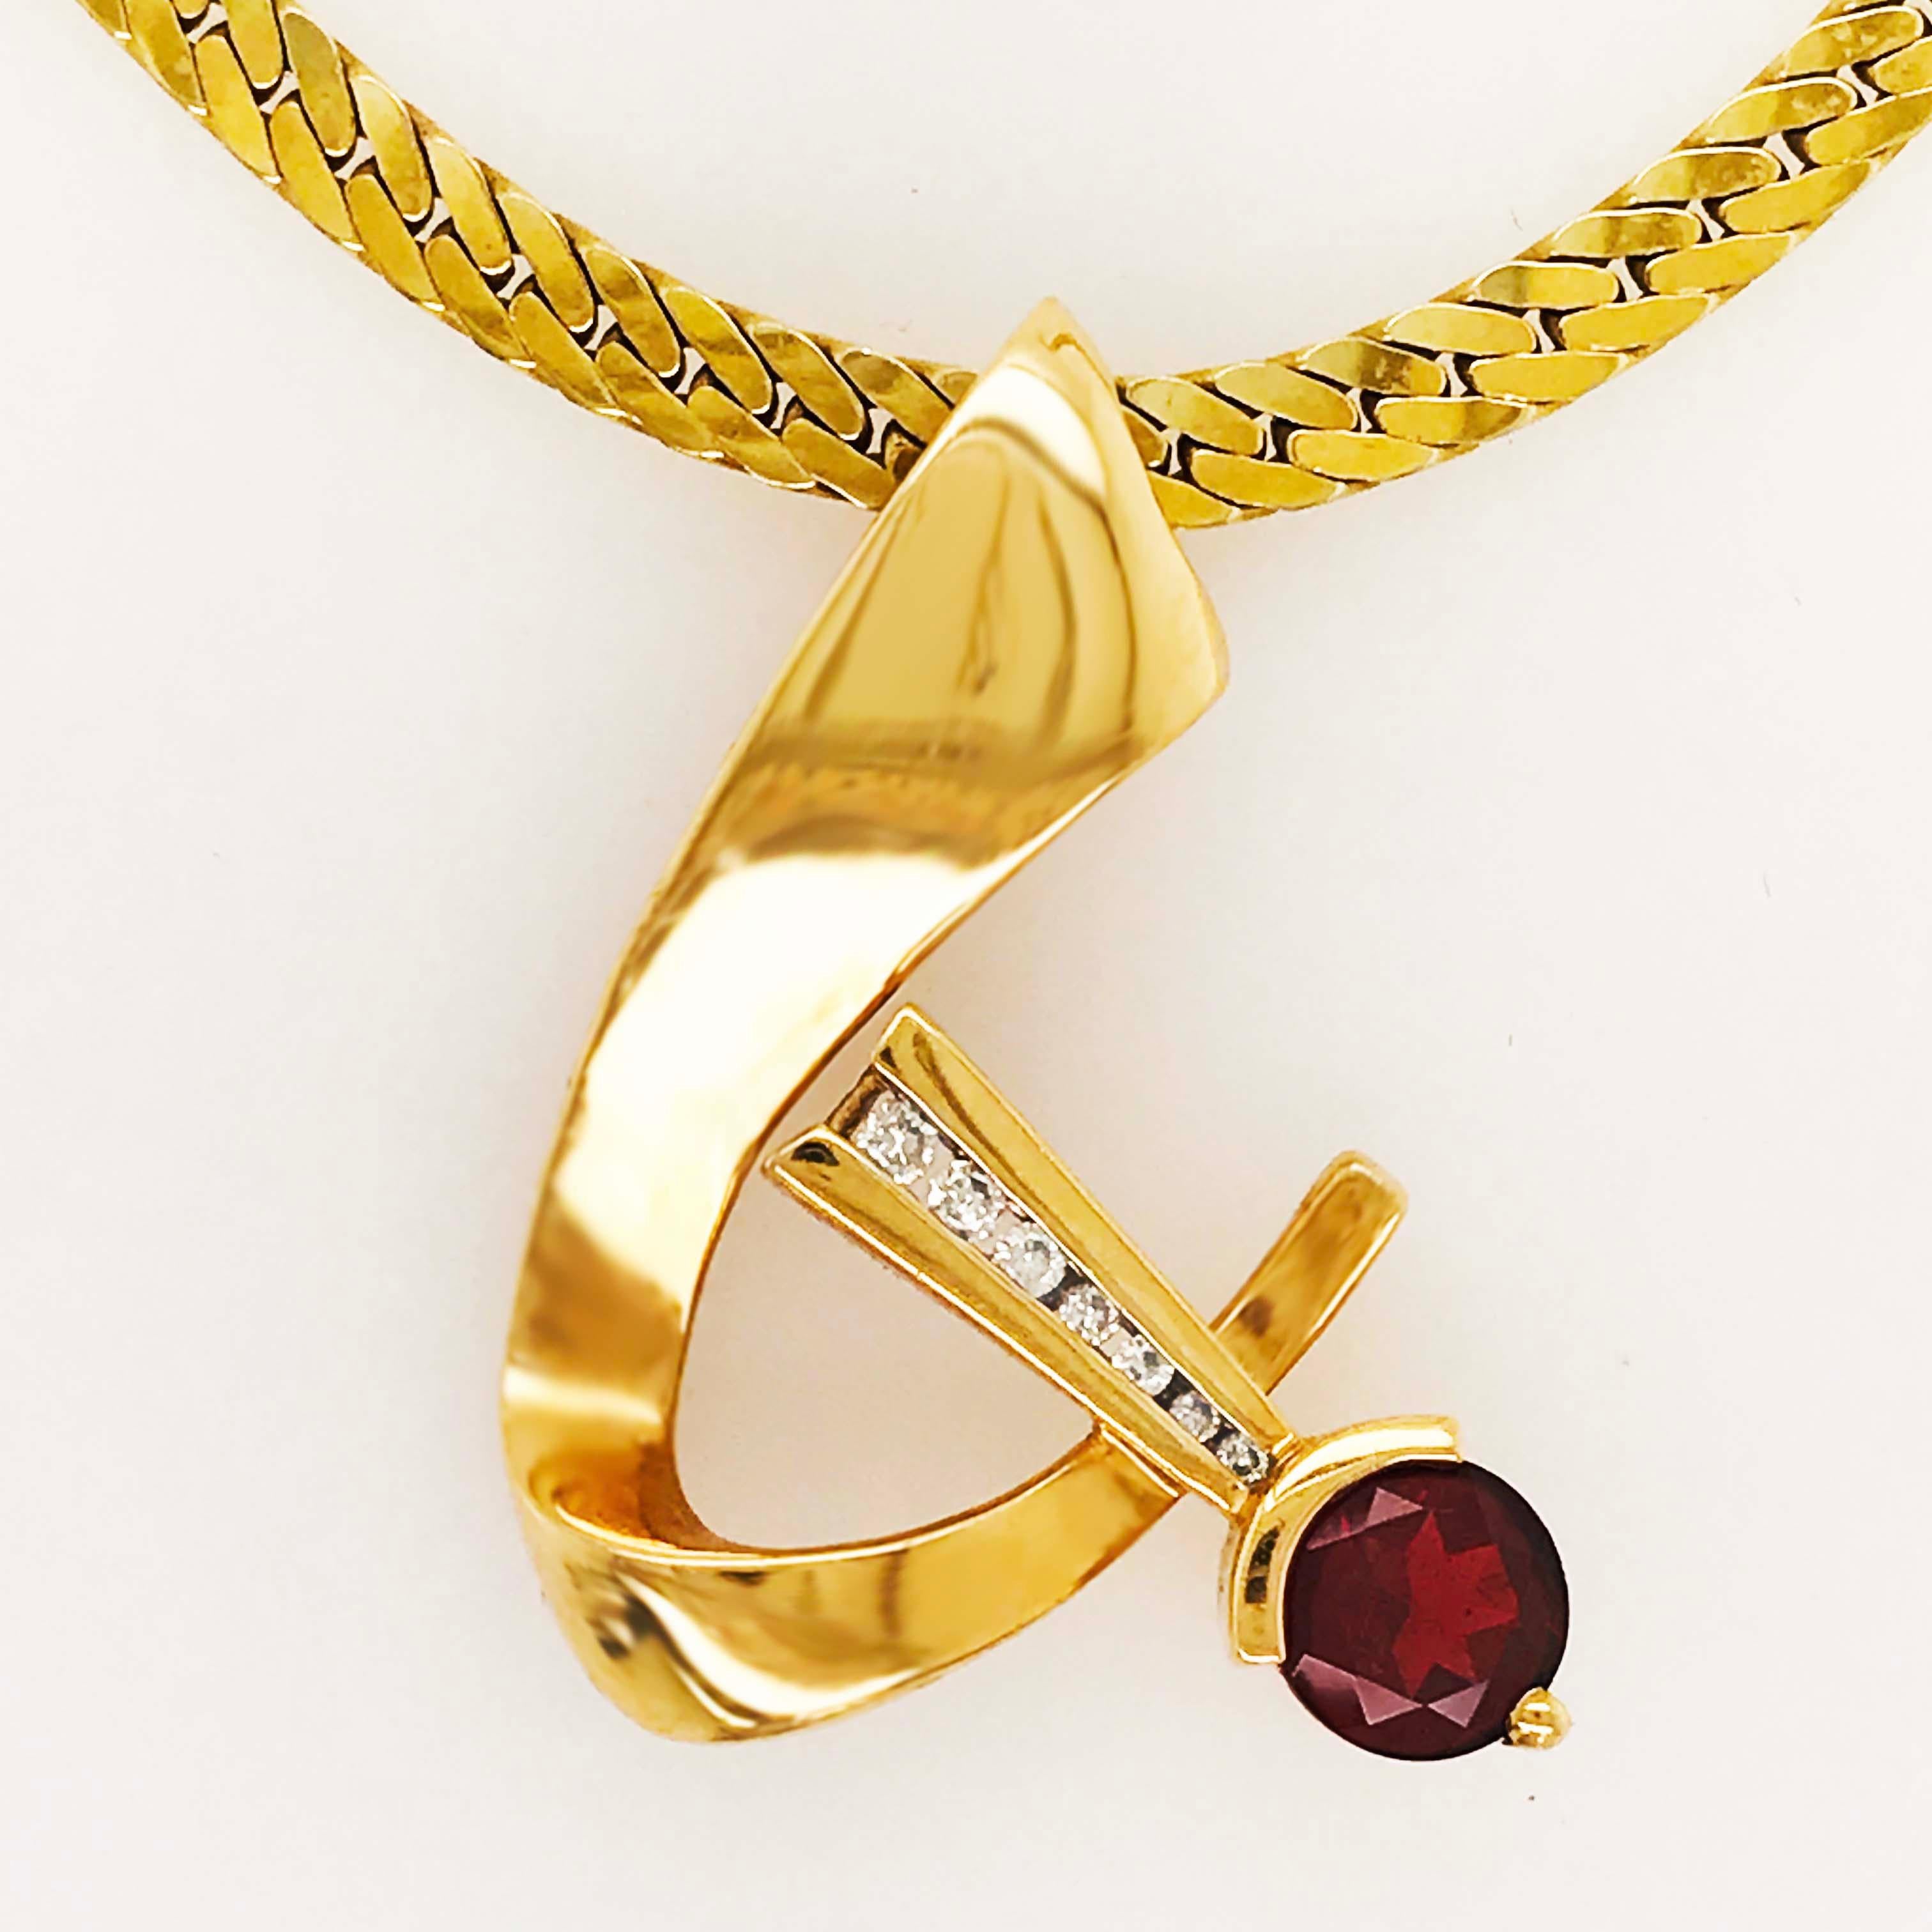 This gorgeous diamond and garnet pendant is a retro, custom design with a high polished finish. The slide pendant is on a 14 karat yellow gold, Miami Cuban, flat cable link chain that is 16 inches and 3.6 millimeters wide. The 14 karat yellow gold